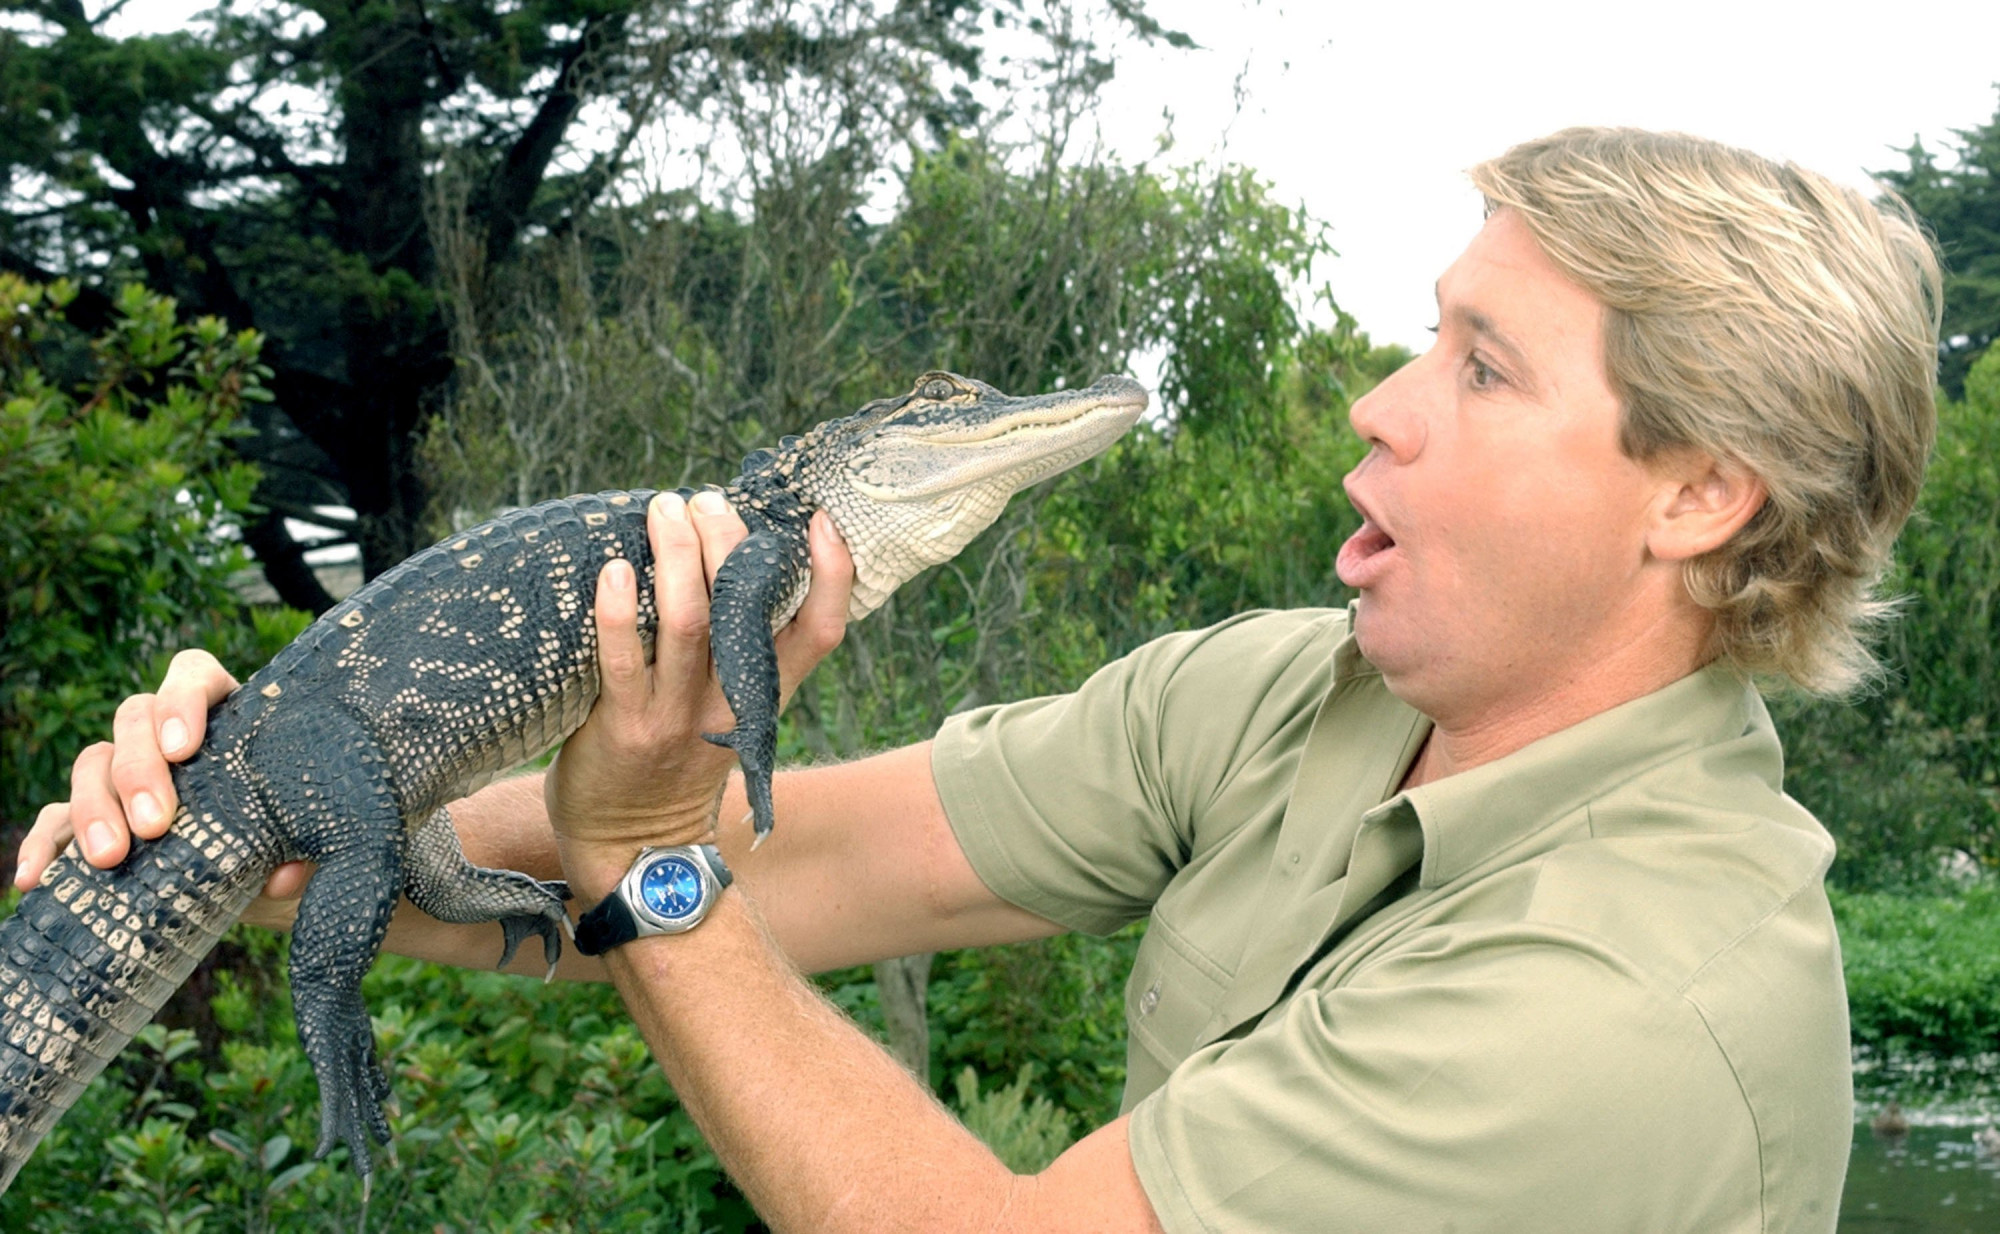 Steve Irwin’s Son Looks Exactly Like Him in This Re-created Photo